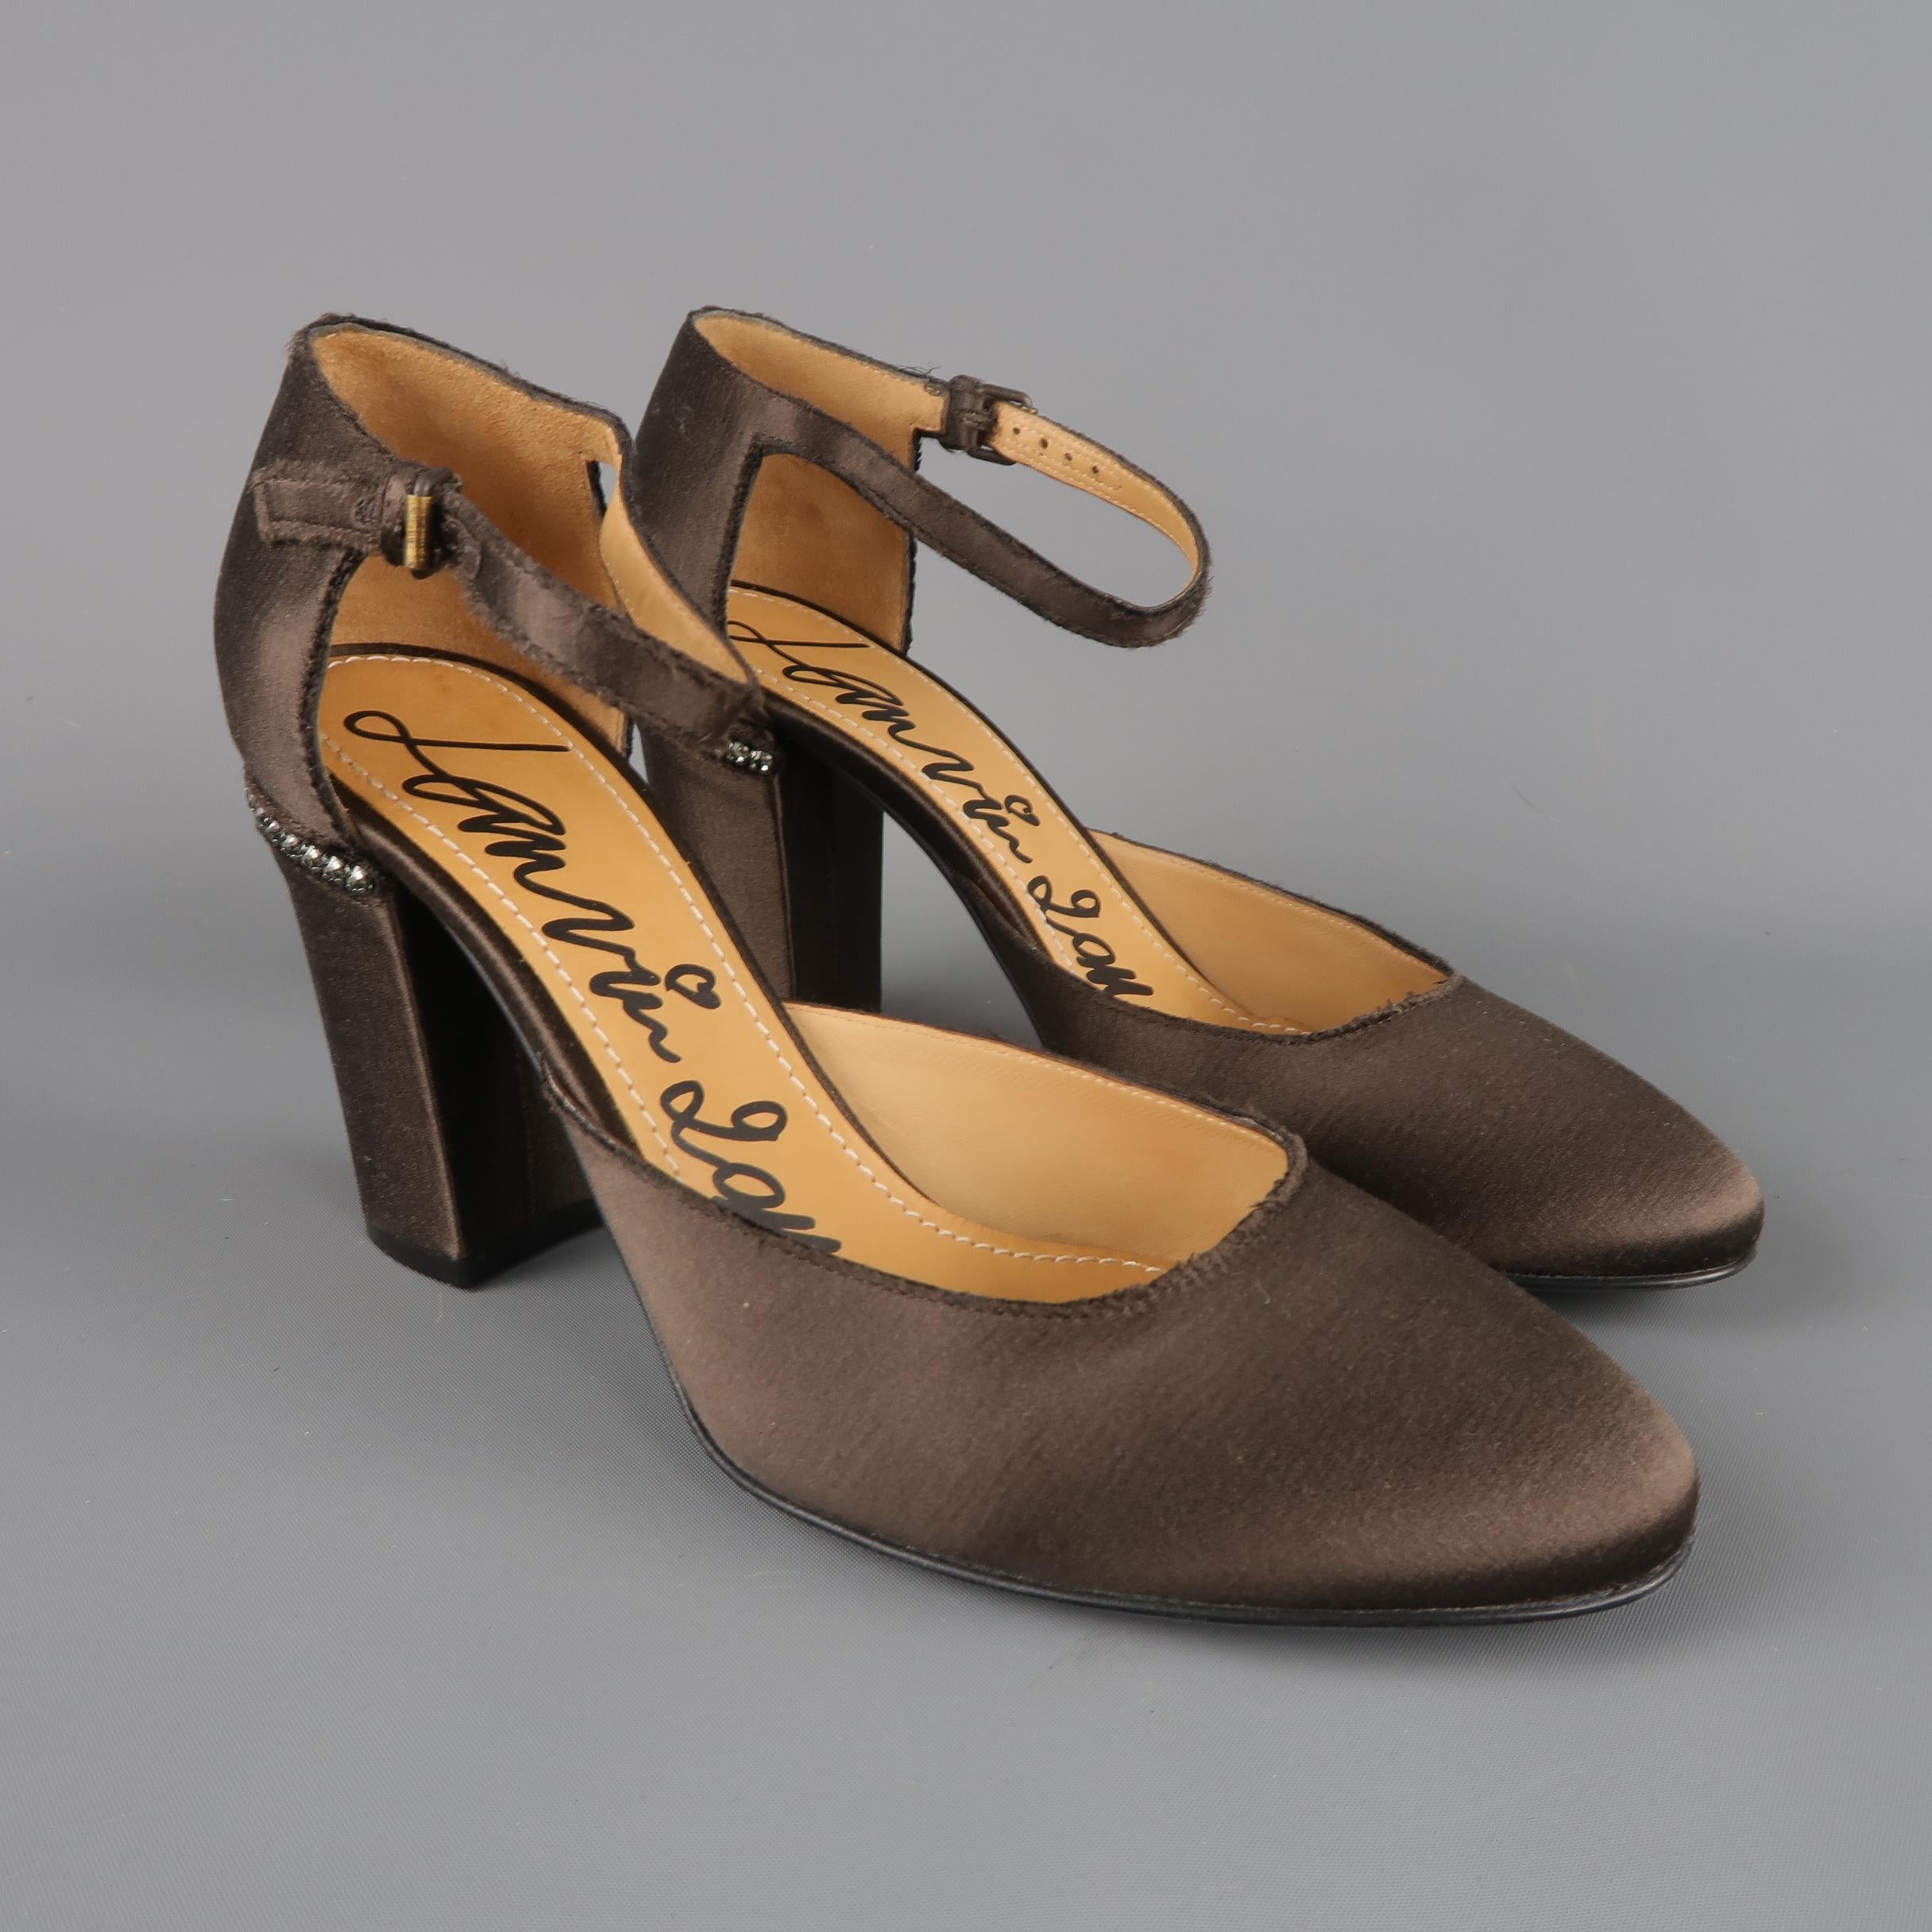 LANVIN pumps come in taupe silk with a frayed edge. round toe, ankle strap, and chunky covered heel with rhinestone embellishment. With box. Made in Italy.
 
Good Pre-Owned Condition.
Marked: IT 38.5
 
Measurements:
 
Heel: 3.25 in.